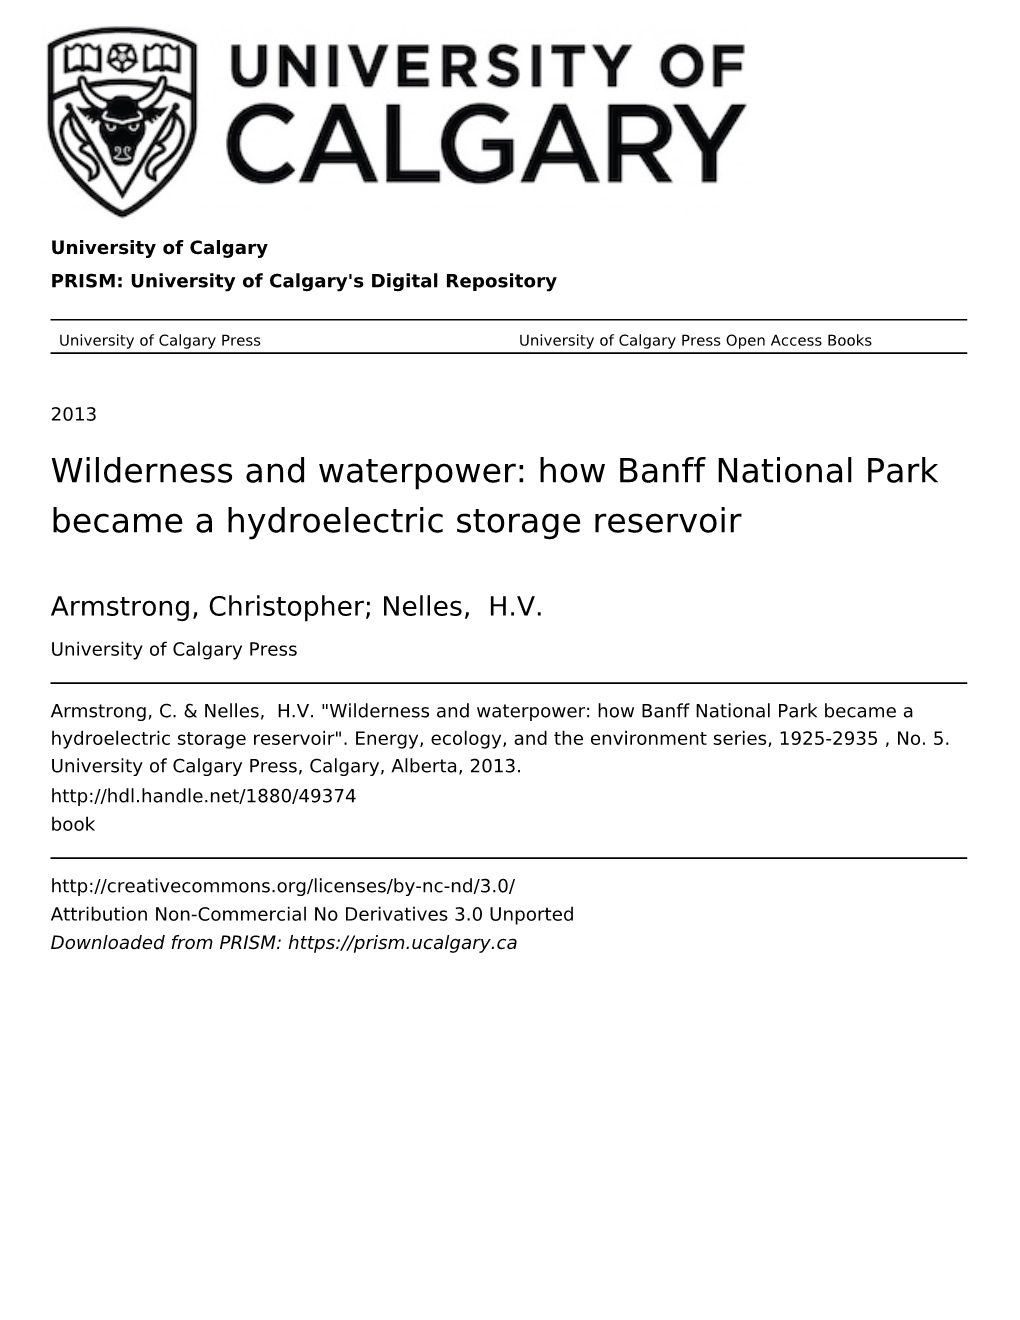 How Banff National Park Became a Hydroelectric Storage Reservoir